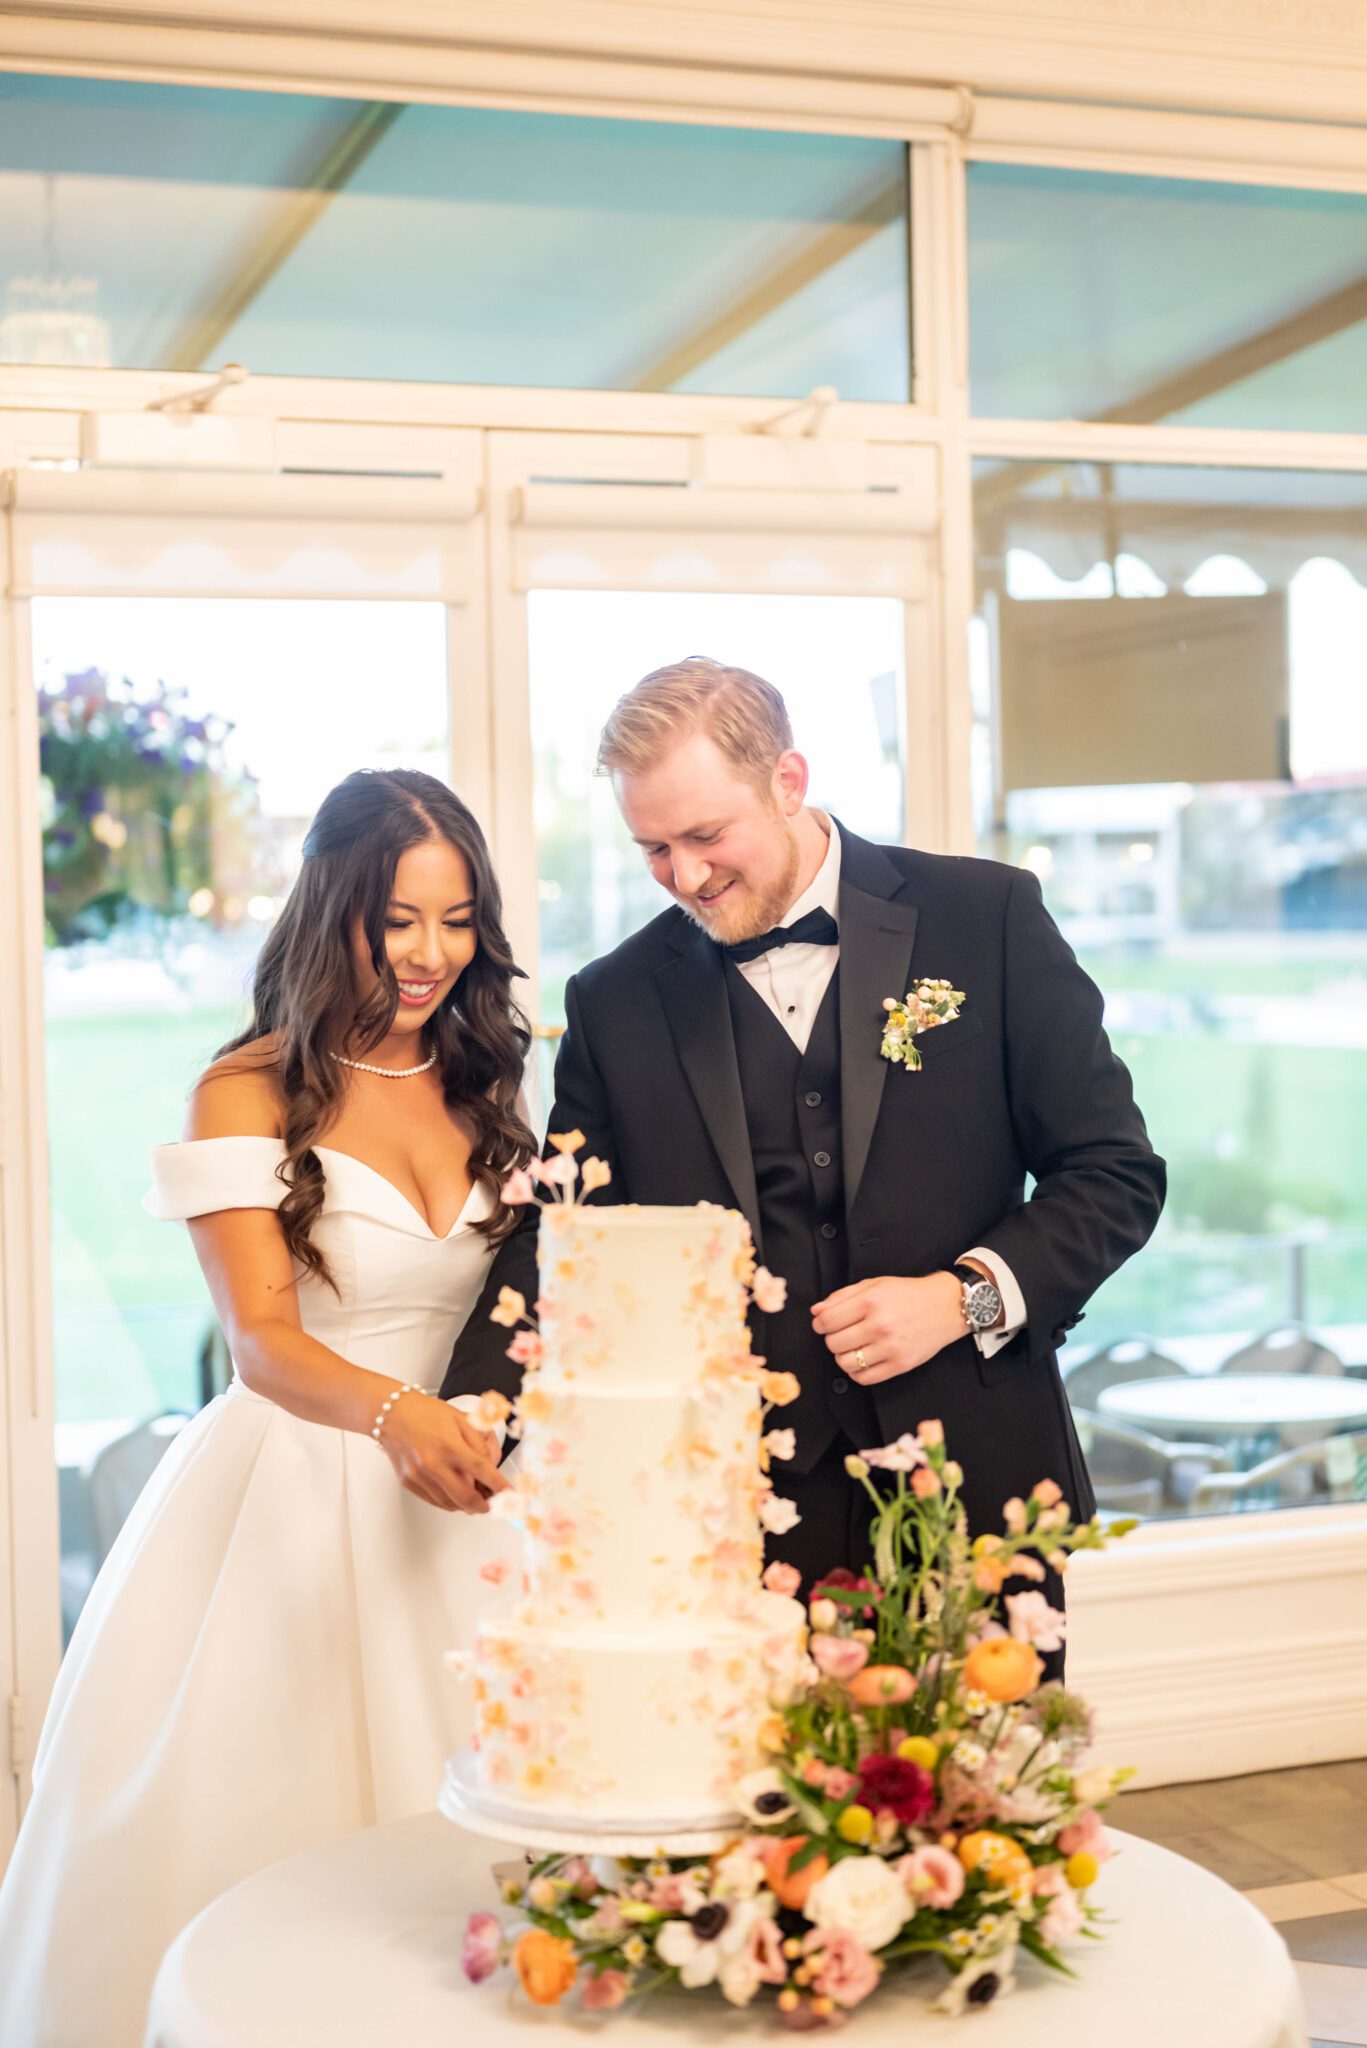 Couple cuts their two-tiered, floral-inspired wedding cake at their wedding reception at Spruce Meadows.